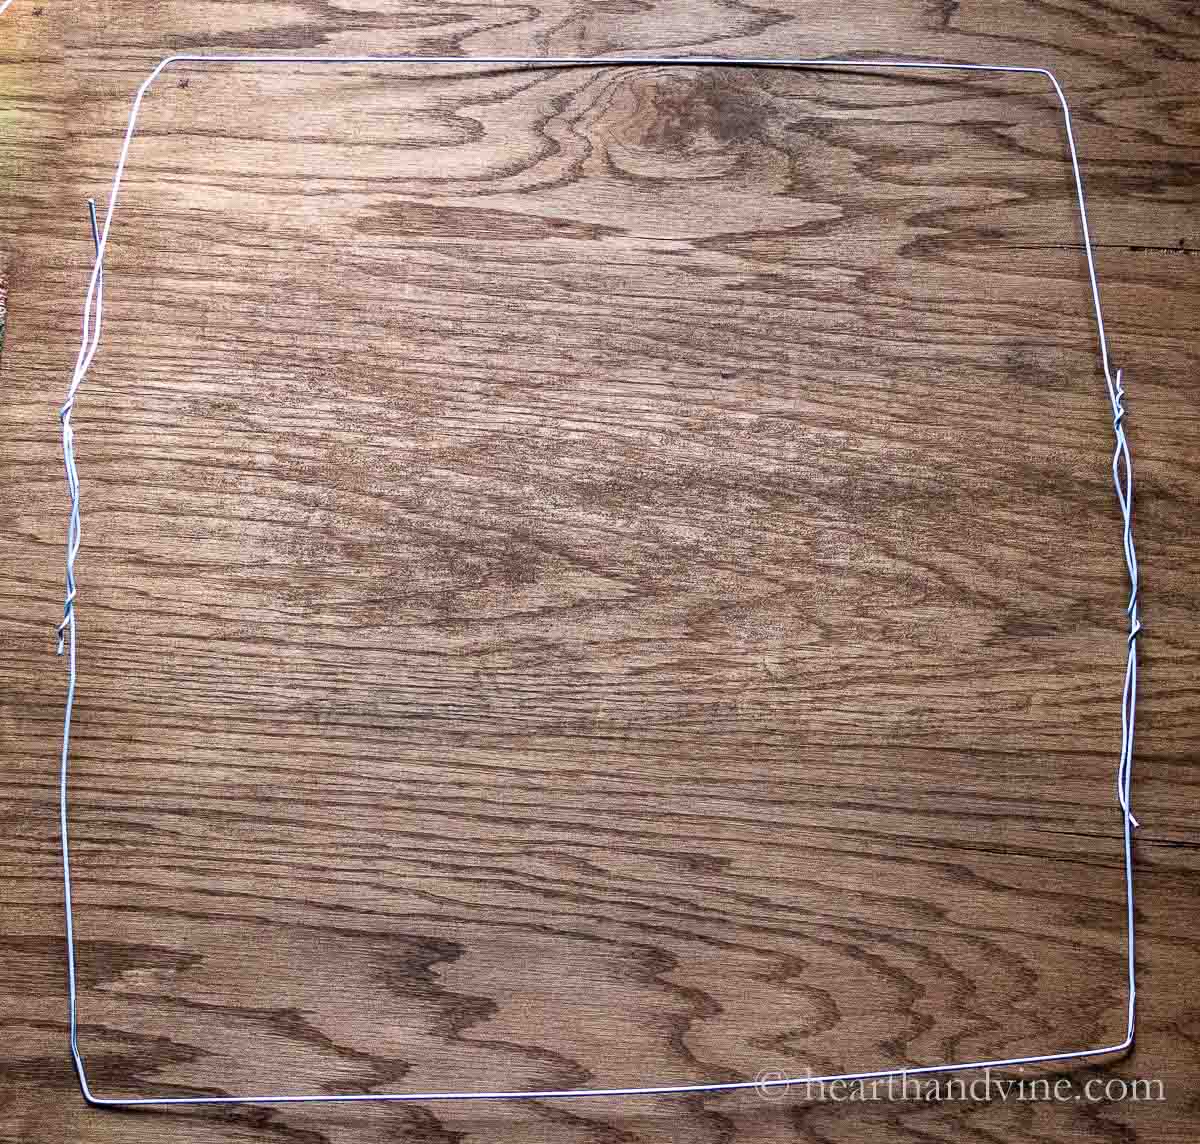 White wire hangers made into a large square.